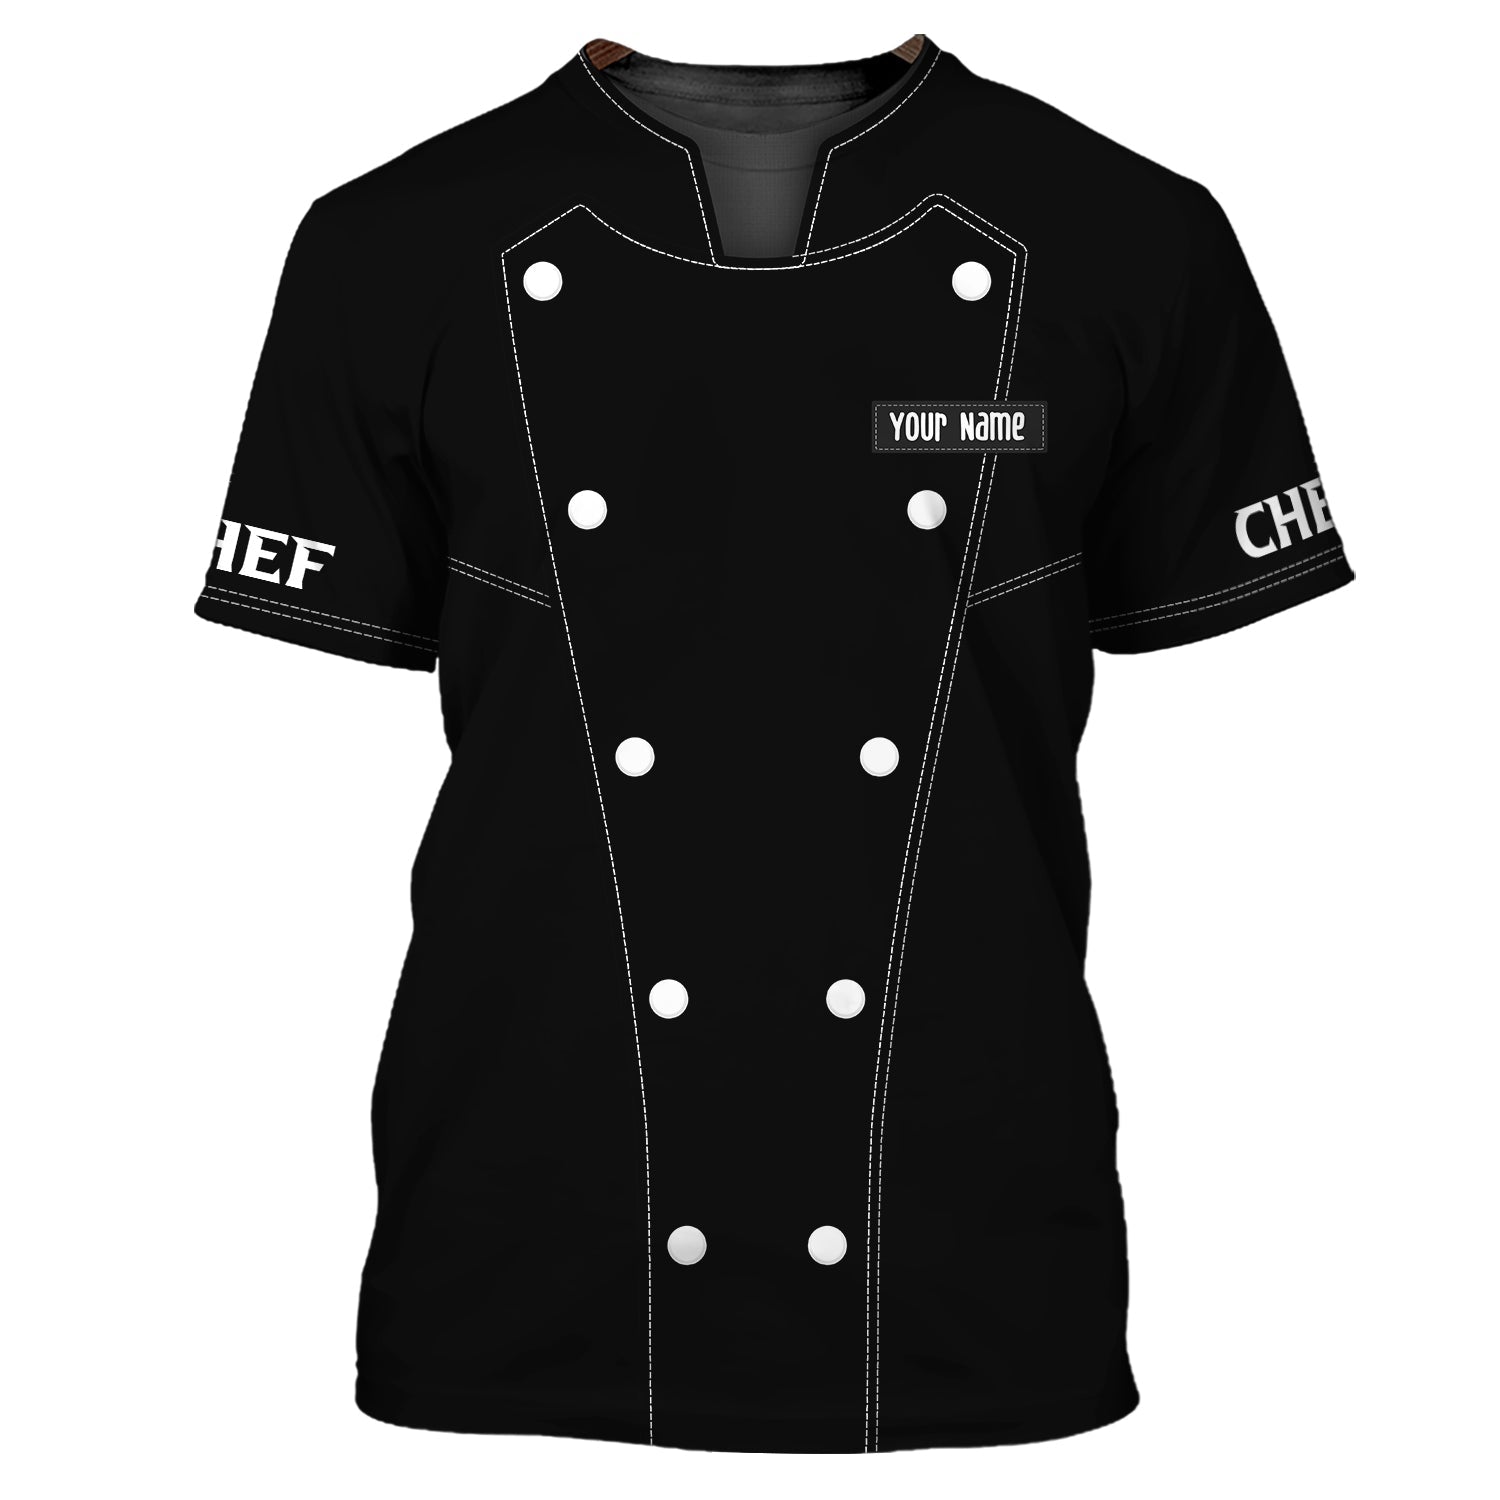 Chef Personalized Shirt Chef Apparel Chef Wear Cook Shirts Chef Uniform Black & White